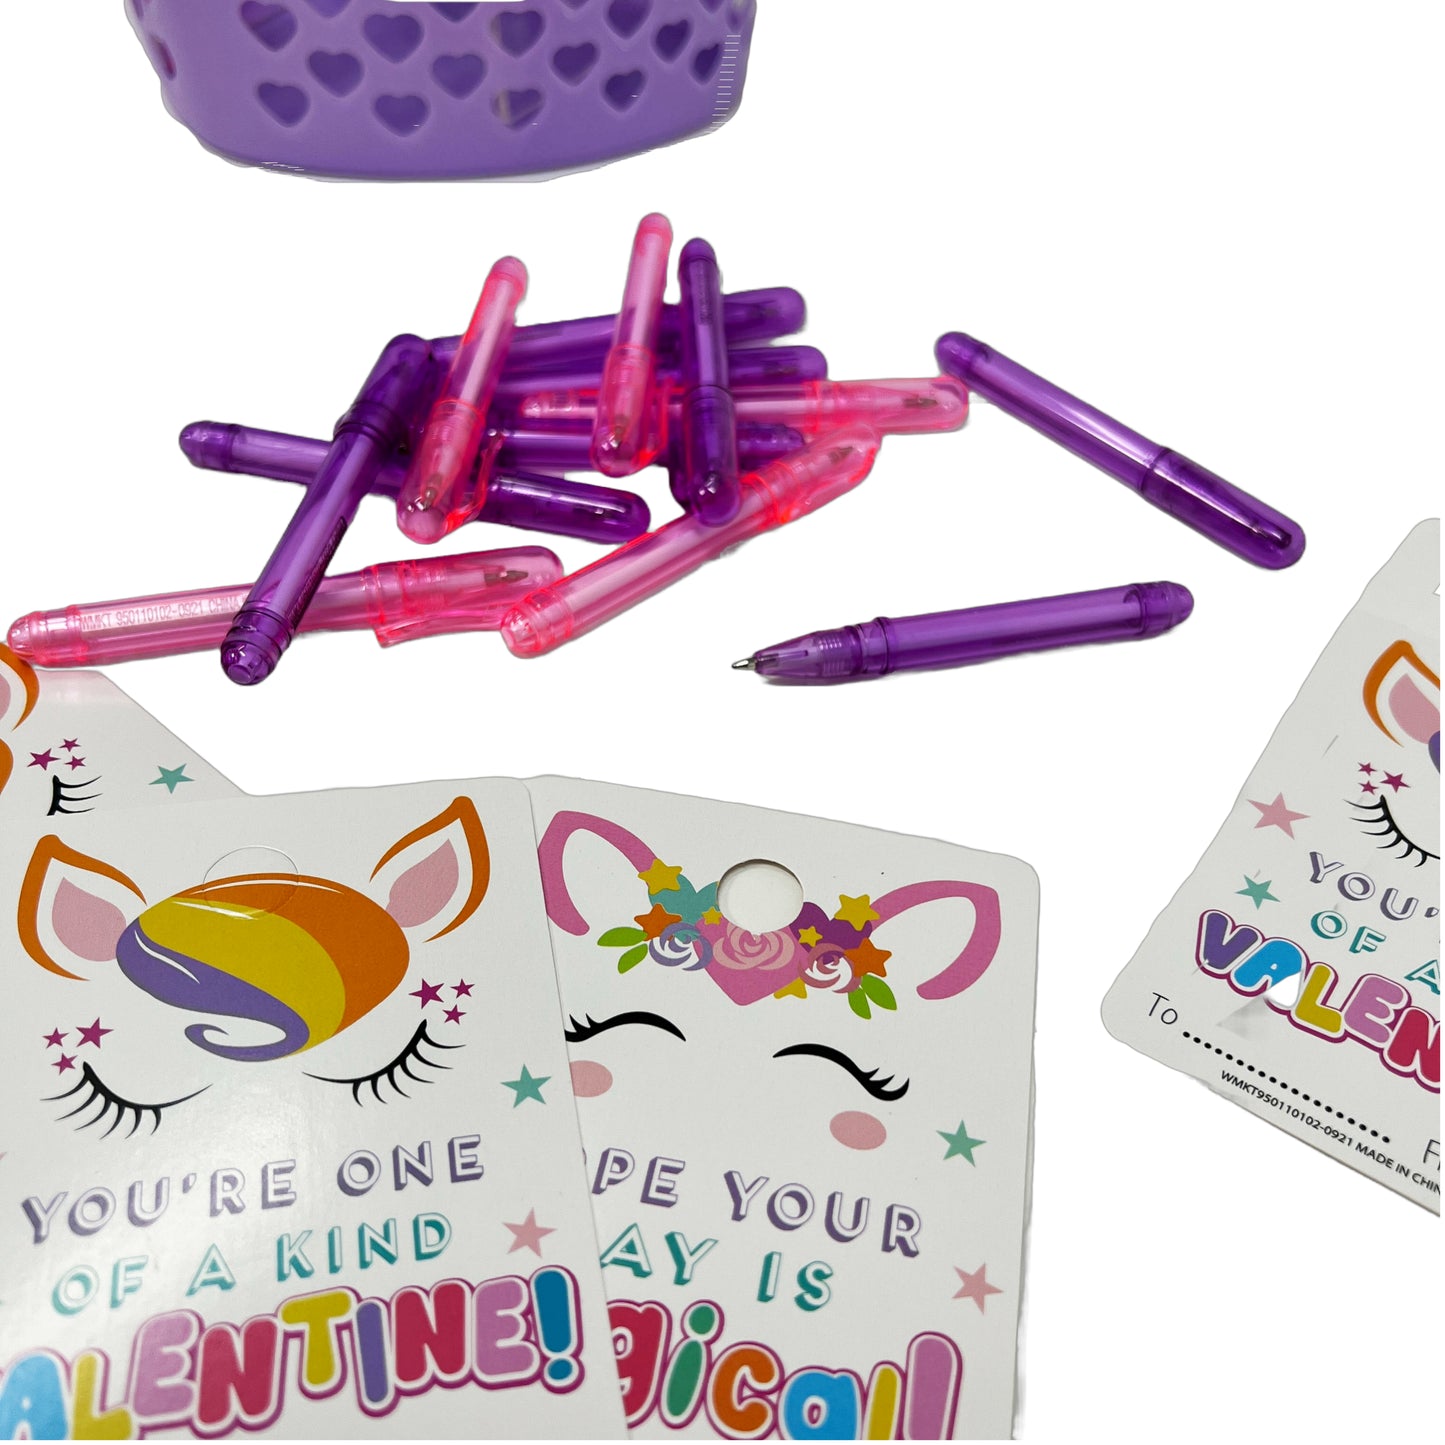 Cheep N Cheerful Valentine Kiddie Card Basket with 16ct Mini Pens and Unicorn Cards, Deluxe Valentine Cards, Kids valentines, 33 pcs